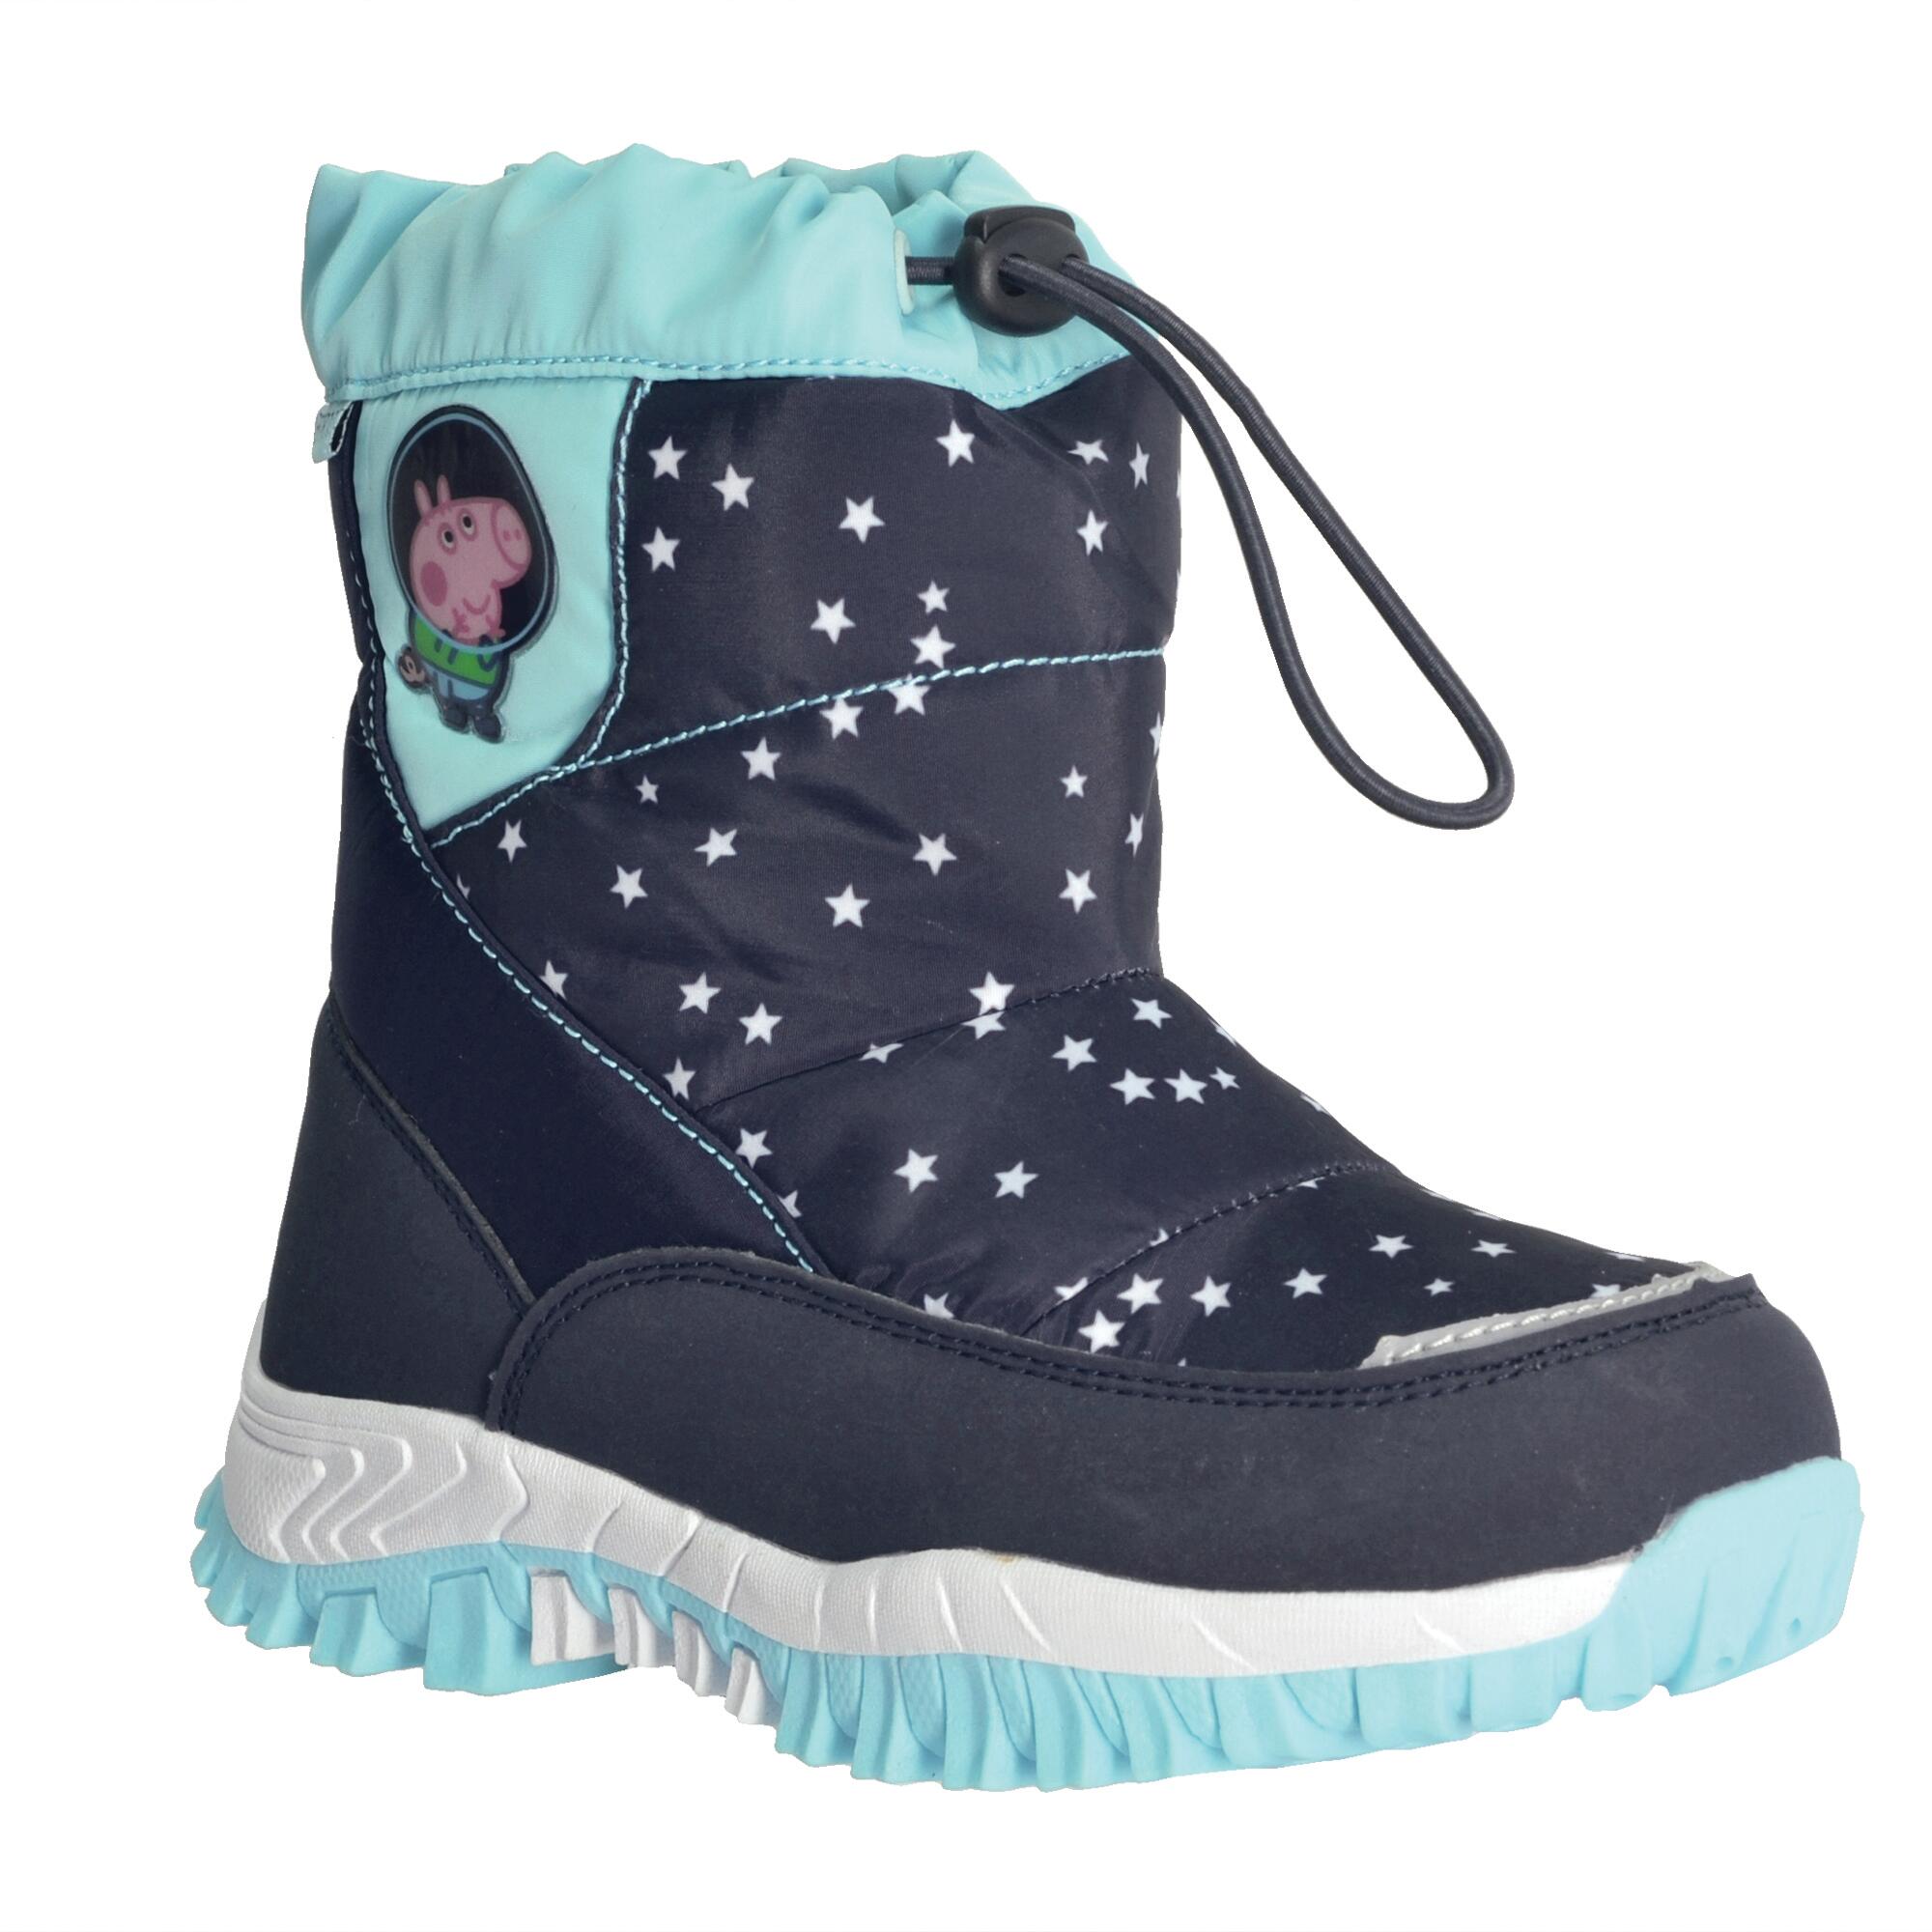 Snow Boots Kids Hiking Boots Boys Girls Fur Lined Winter Trainers Childrens Outdoor Cilmbing Warm Shoes School Waterproof Black Blue Brown 12.5-6 UK 